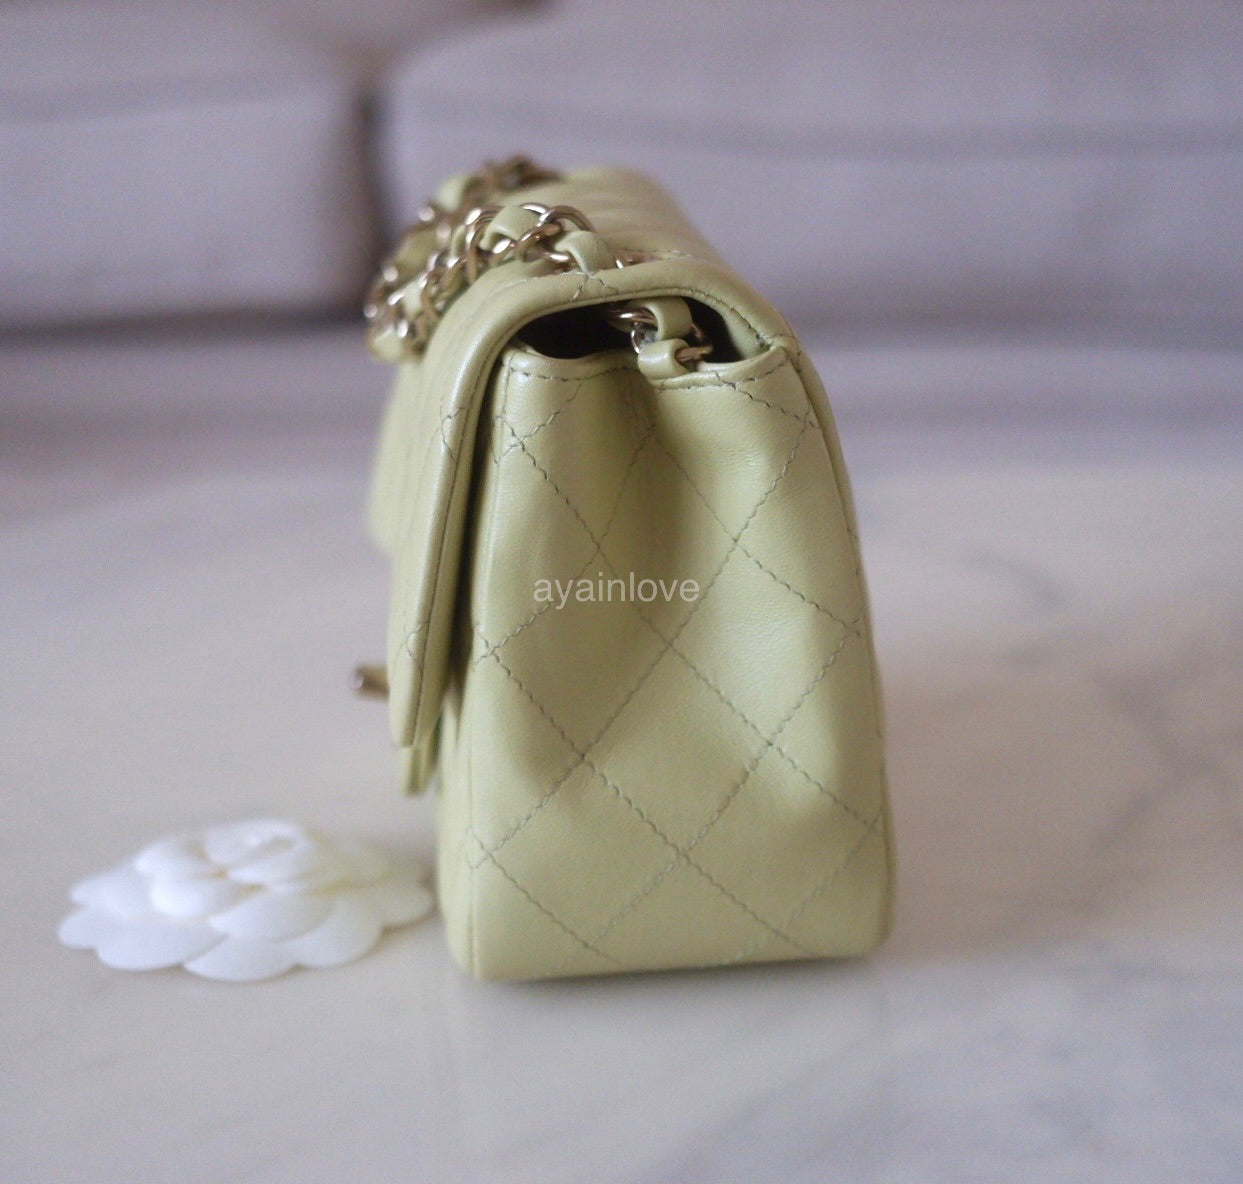 Chanel Classic Single Flap Bag Quilted Iridescent Lambskin Mini